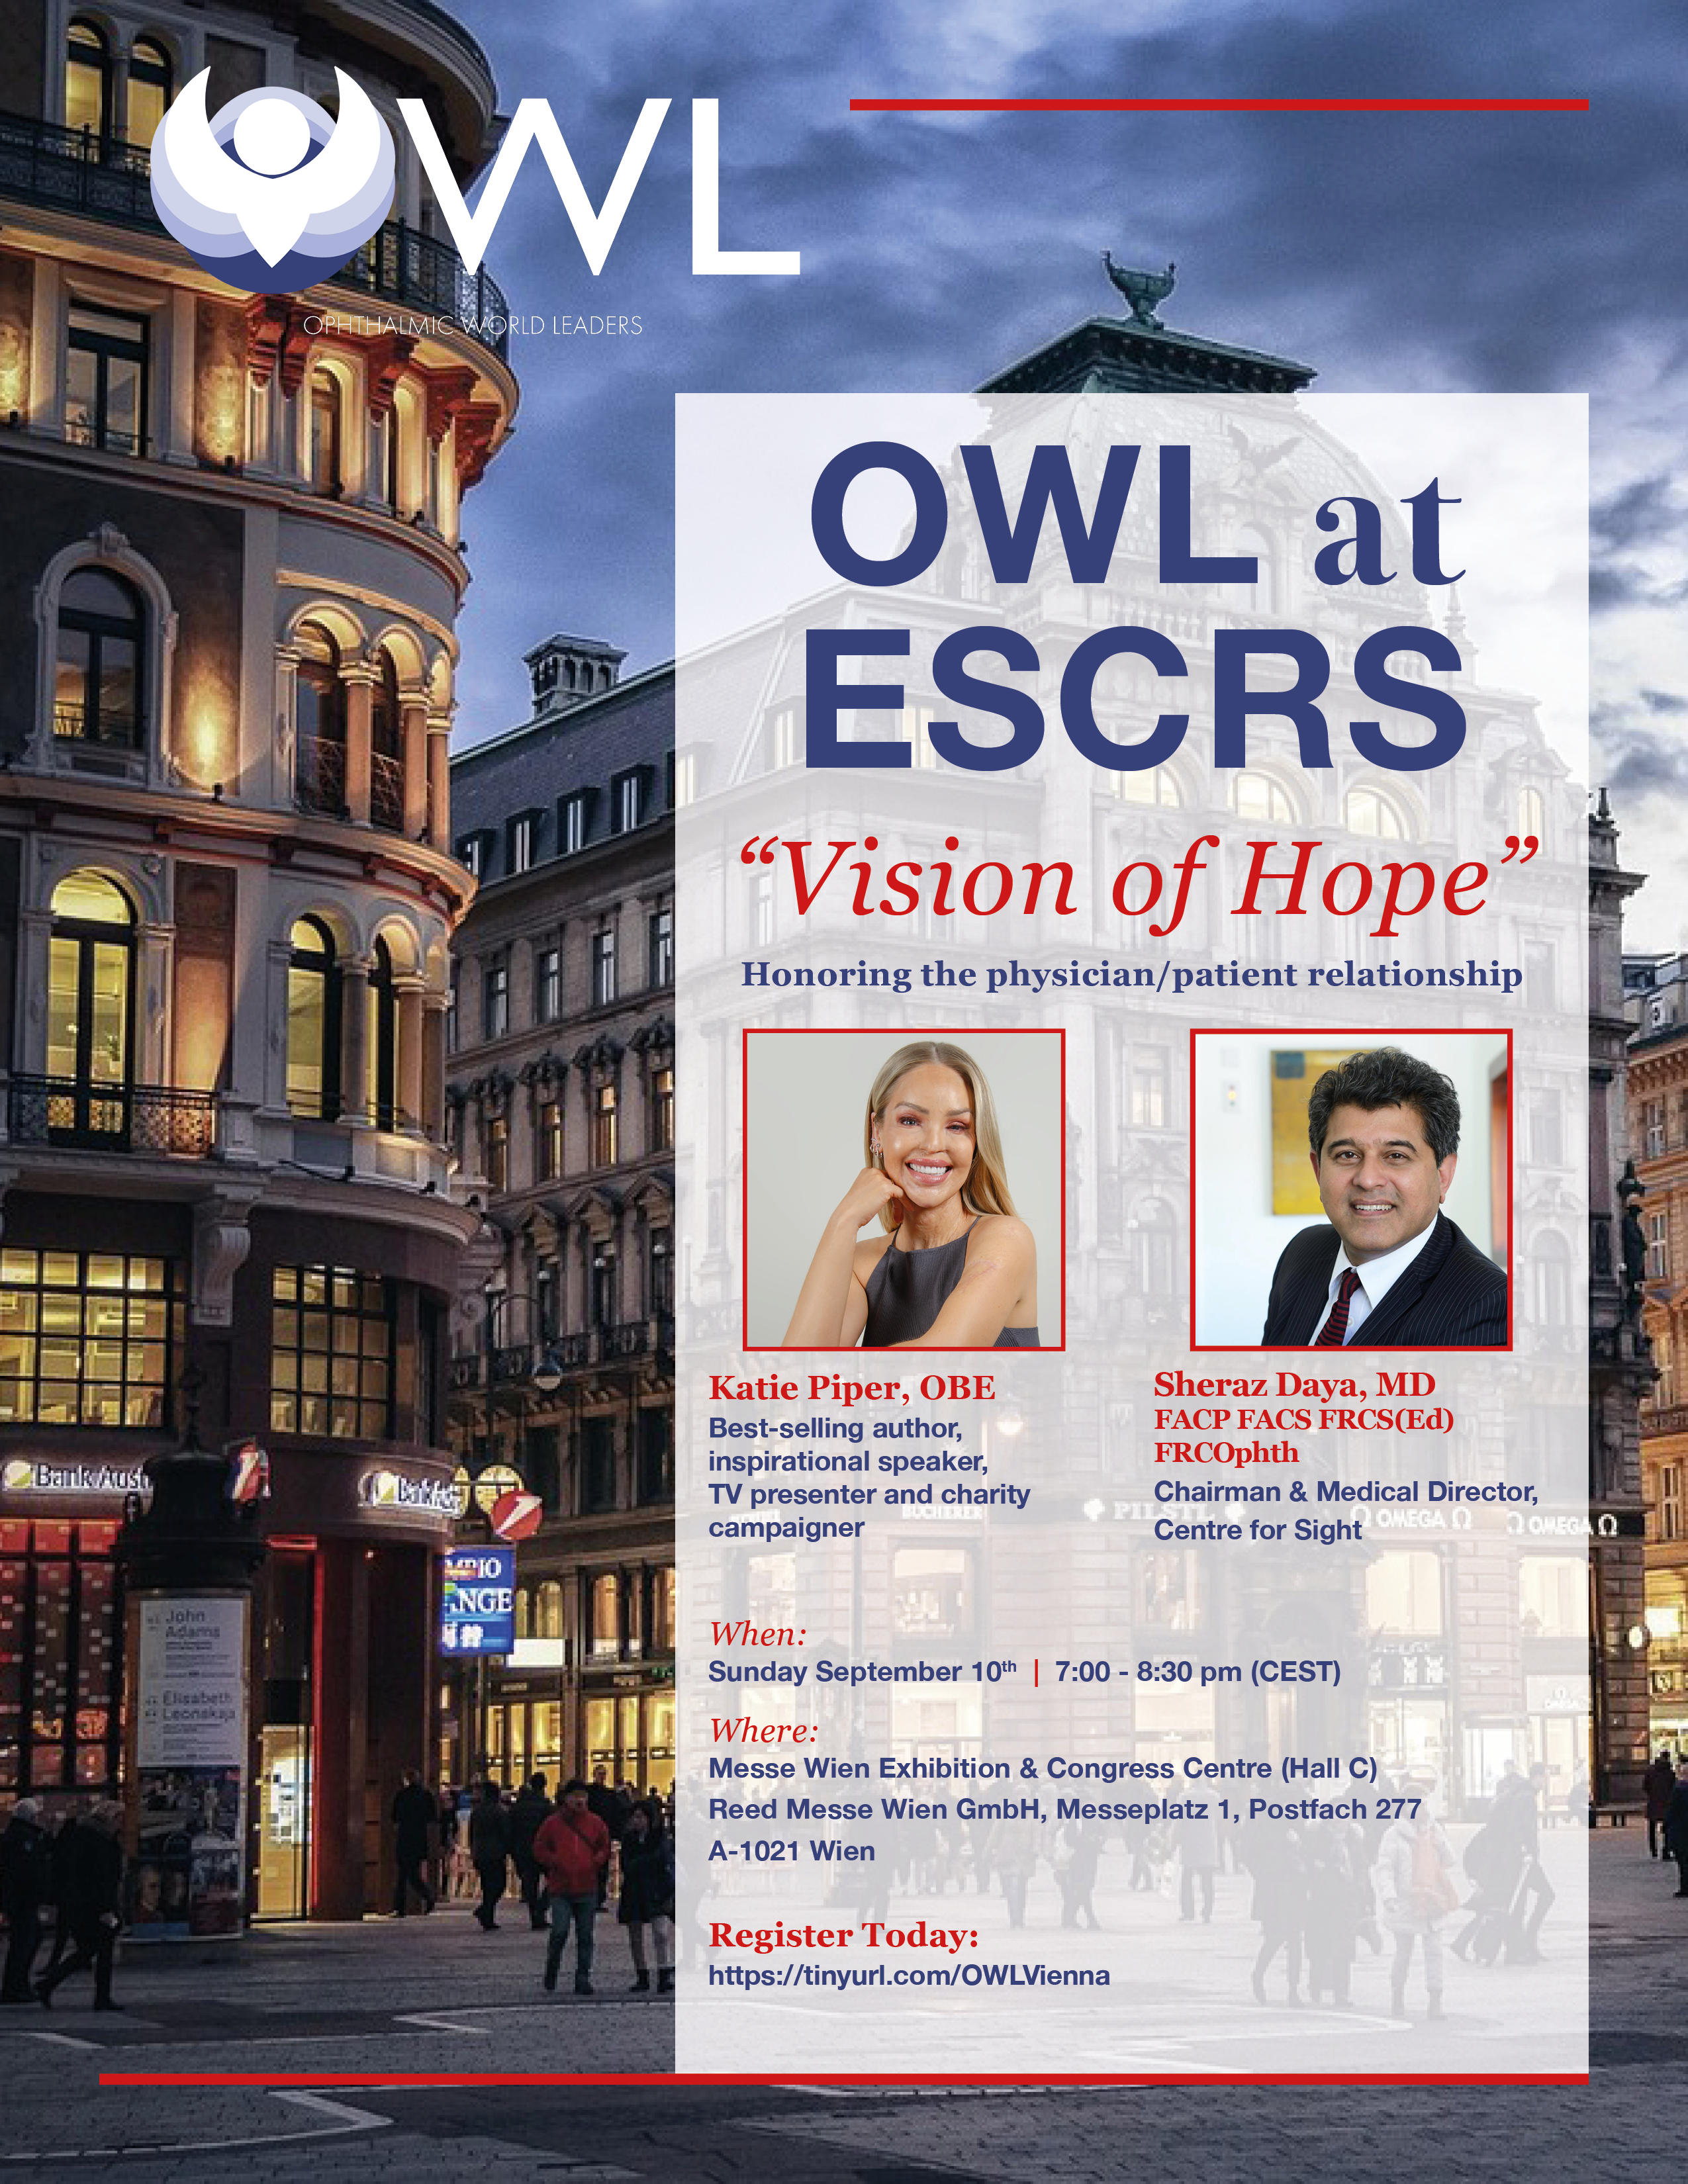 Expand your network with our OWL at ESCRS program: "Vision of Hope" Honoring the physician/patient relationship with Katie Piper, OBE - Best-selling author, inspirational speaker, TV presenter and charity campaigner and Sheraz Daya, MD, FACP, FACS, FRCS(Ed), FRCOphth - Chairman & Medical Director, Centre for Sight | When: Sunday, September 10, 2023; 7:00 PM - 8:30 PM (CEST) Where: Messe Wien Exhibition & Congress Centre (Hall C) - Register now - additional details coming soon!